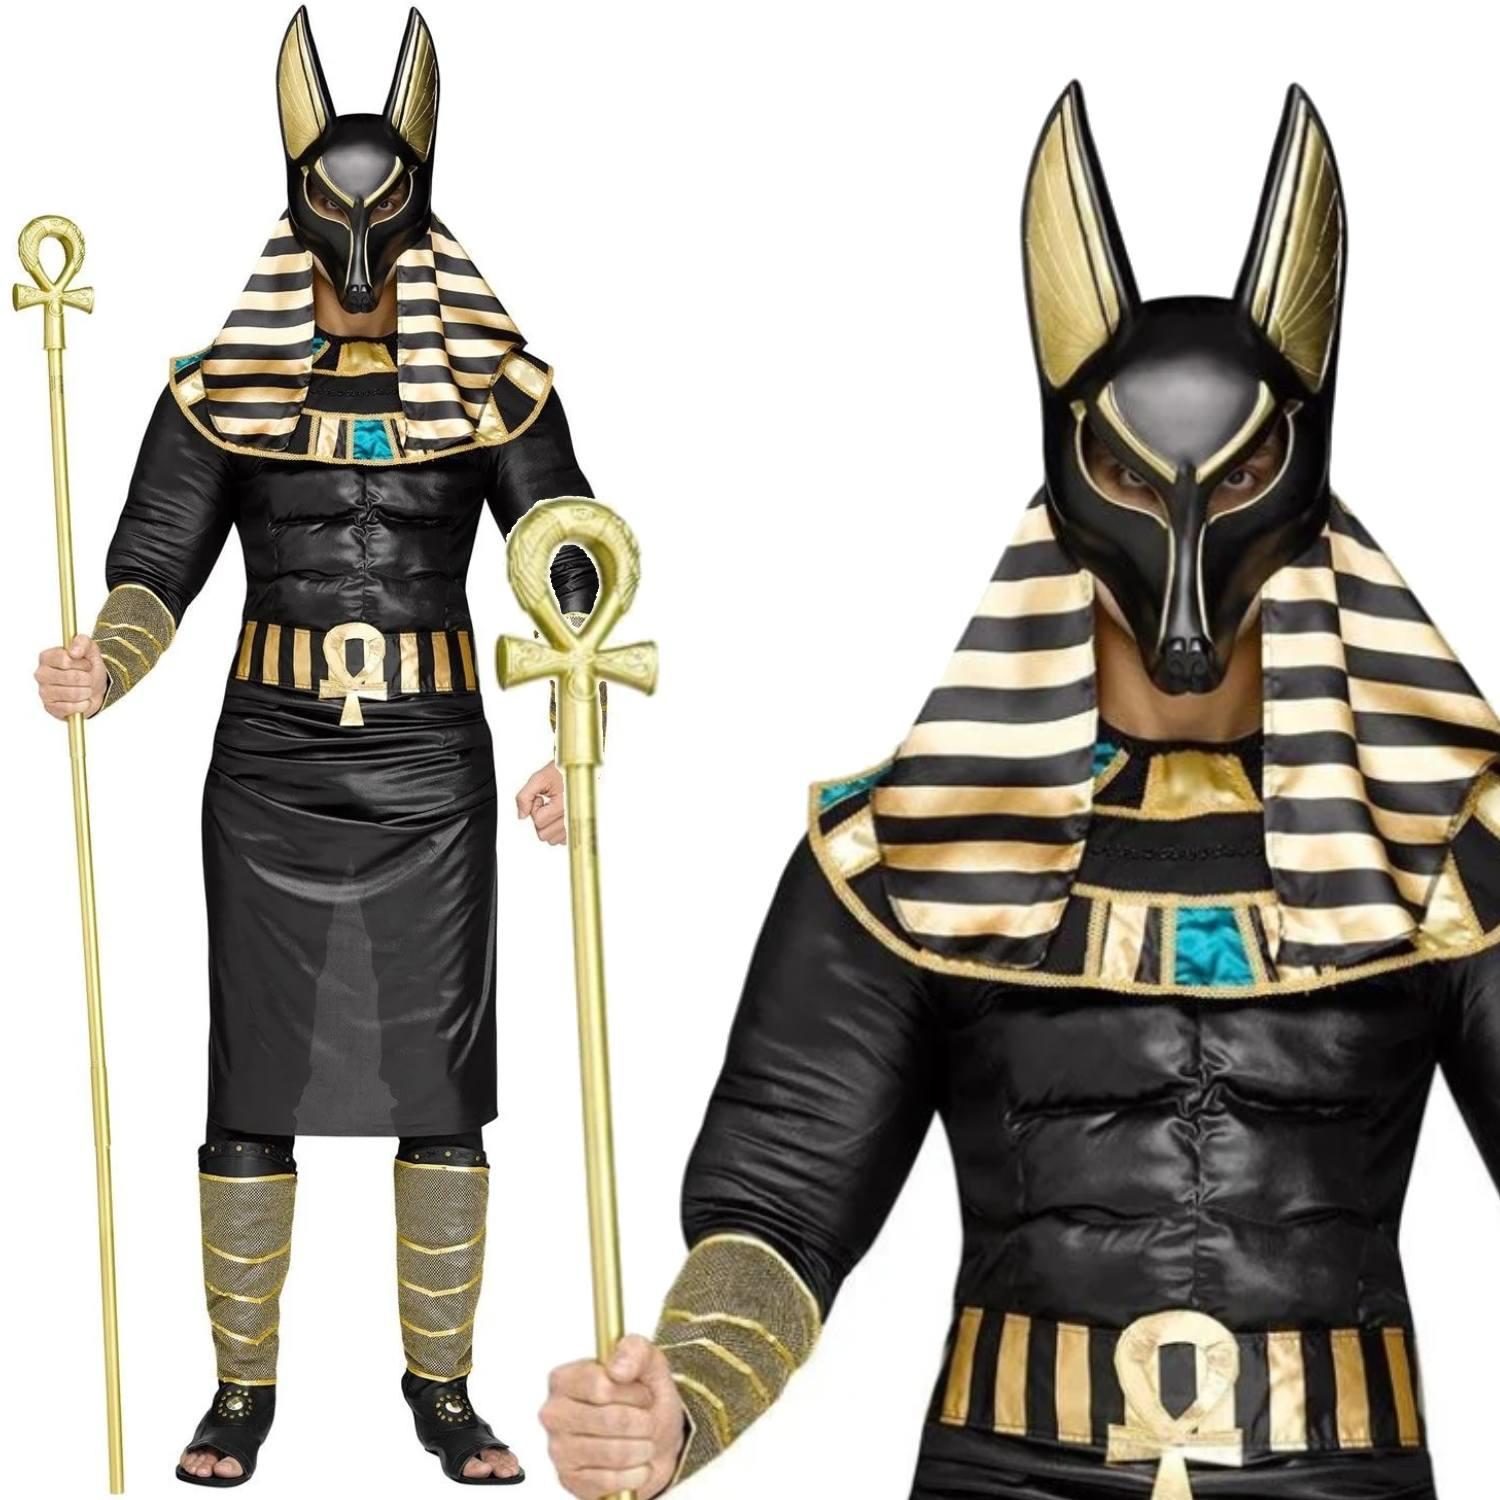 Egyptian Anubis The Jackal Costume For Adults By Fun World 132044 3335a Karnival Costumes